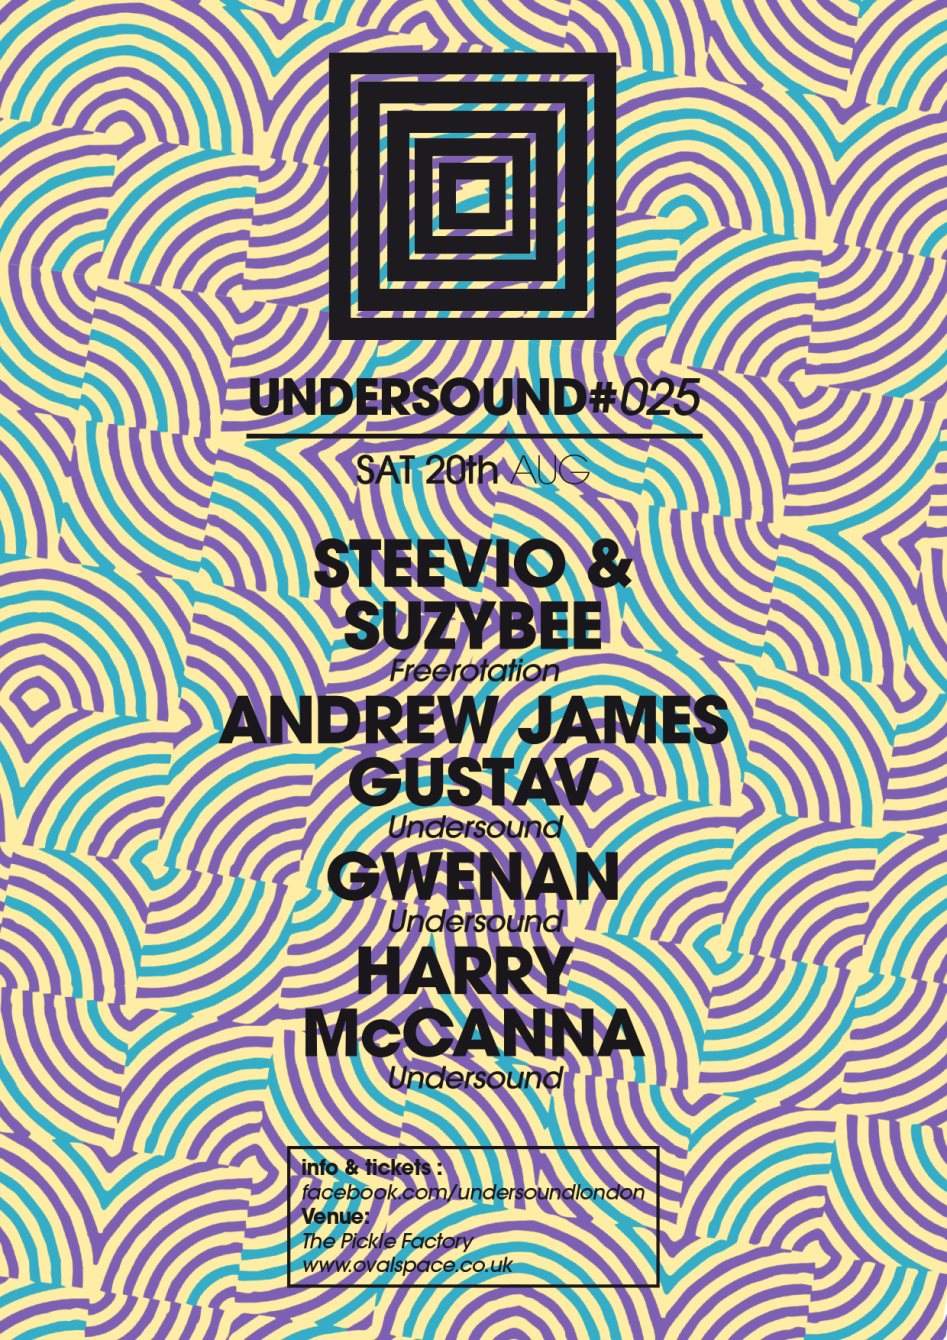 Undersound #25 - Freerotation Takeover with Steevio, Suzybee & Undersound Residents - Página frontal